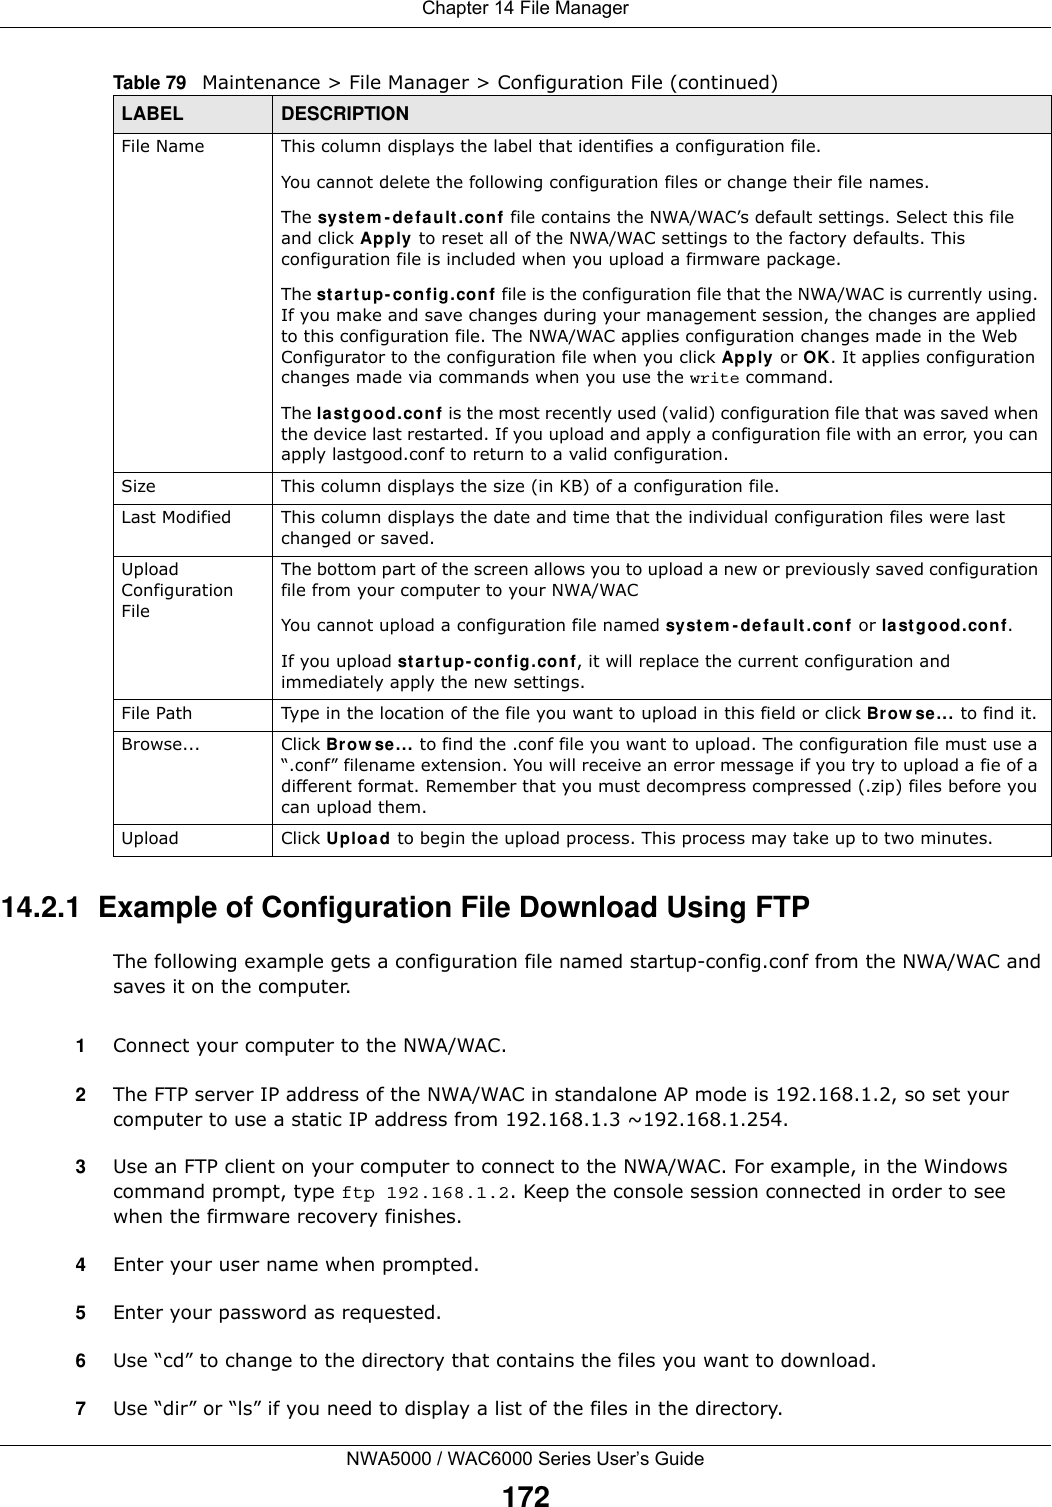 Chapter 14 File ManagerNWA5000 / WAC6000 Series User’s Guide17214.2.1  Example of Configuration File Download Using FTPThe following example gets a configuration file named startup-config.conf from the NWA/WAC and saves it on the computer.1Connect your computer to the NWA/WAC. 2The FTP server IP address of the NWA/WAC in standalone AP mode is 192.168.1.2, so set your computer to use a static IP address from 192.168.1.3 ~192.168.1.254.3Use an FTP client on your computer to connect to the NWA/WAC. For example, in the Windows command prompt, type ftp 192.168.1.2. Keep the console session connected in order to see when the firmware recovery finishes. 4Enter your user name when prompted.5Enter your password as requested.6Use “cd” to change to the directory that contains the files you want to download. 7Use “dir” or “ls” if you need to display a list of the files in the directory.File Name This column displays the label that identifies a configuration file.You cannot delete the following configuration files or change their file names. The syst em - default .con f file contains the NWA/WAC’s default settings. Select this file and click Apply to reset all of the NWA/WAC settings to the factory defaults. This configuration file is included when you upload a firmware package. The st a rt up- config. co nf  file is the configuration file that the NWA/WAC is currently using. If you make and save changes during your management session, the changes are applied to this configuration file. The NWA/WAC applies configuration changes made in the Web Configurator to the configuration file when you click Apply or OK. It applies configuration changes made via commands when you use the write command. The last good.conf is the most recently used (valid) configuration file that was saved when the device last restarted. If you upload and apply a configuration file with an error, you can apply lastgood.conf to return to a valid configuration.Size This column displays the size (in KB) of a configuration file.Last Modified This column displays the date and time that the individual configuration files were last changed or saved.Upload Configuration FileThe bottom part of the screen allows you to upload a new or previously saved configuration file from your computer to your NWA/WACYou cannot upload a configuration file named sy st e m - d efa u lt . conf or last g oo d. co nf. If you upload st a r t u p- config. co nf, it will replace the current configuration and immediately apply the new settings.File Path  Type in the location of the file you want to upload in this field or click Br ow se ... to find it.Browse...  Click Brow se... to find the .conf file you want to upload. The configuration file must use a “.conf” filename extension. You will receive an error message if you try to upload a fie of a different format. Remember that you must decompress compressed (.zip) files before you can upload them. Upload  Click Upload to begin the upload process. This process may take up to two minutes. Table 79   Maintenance &gt; File Manager &gt; Configuration File (continued)LABEL DESCRIPTION